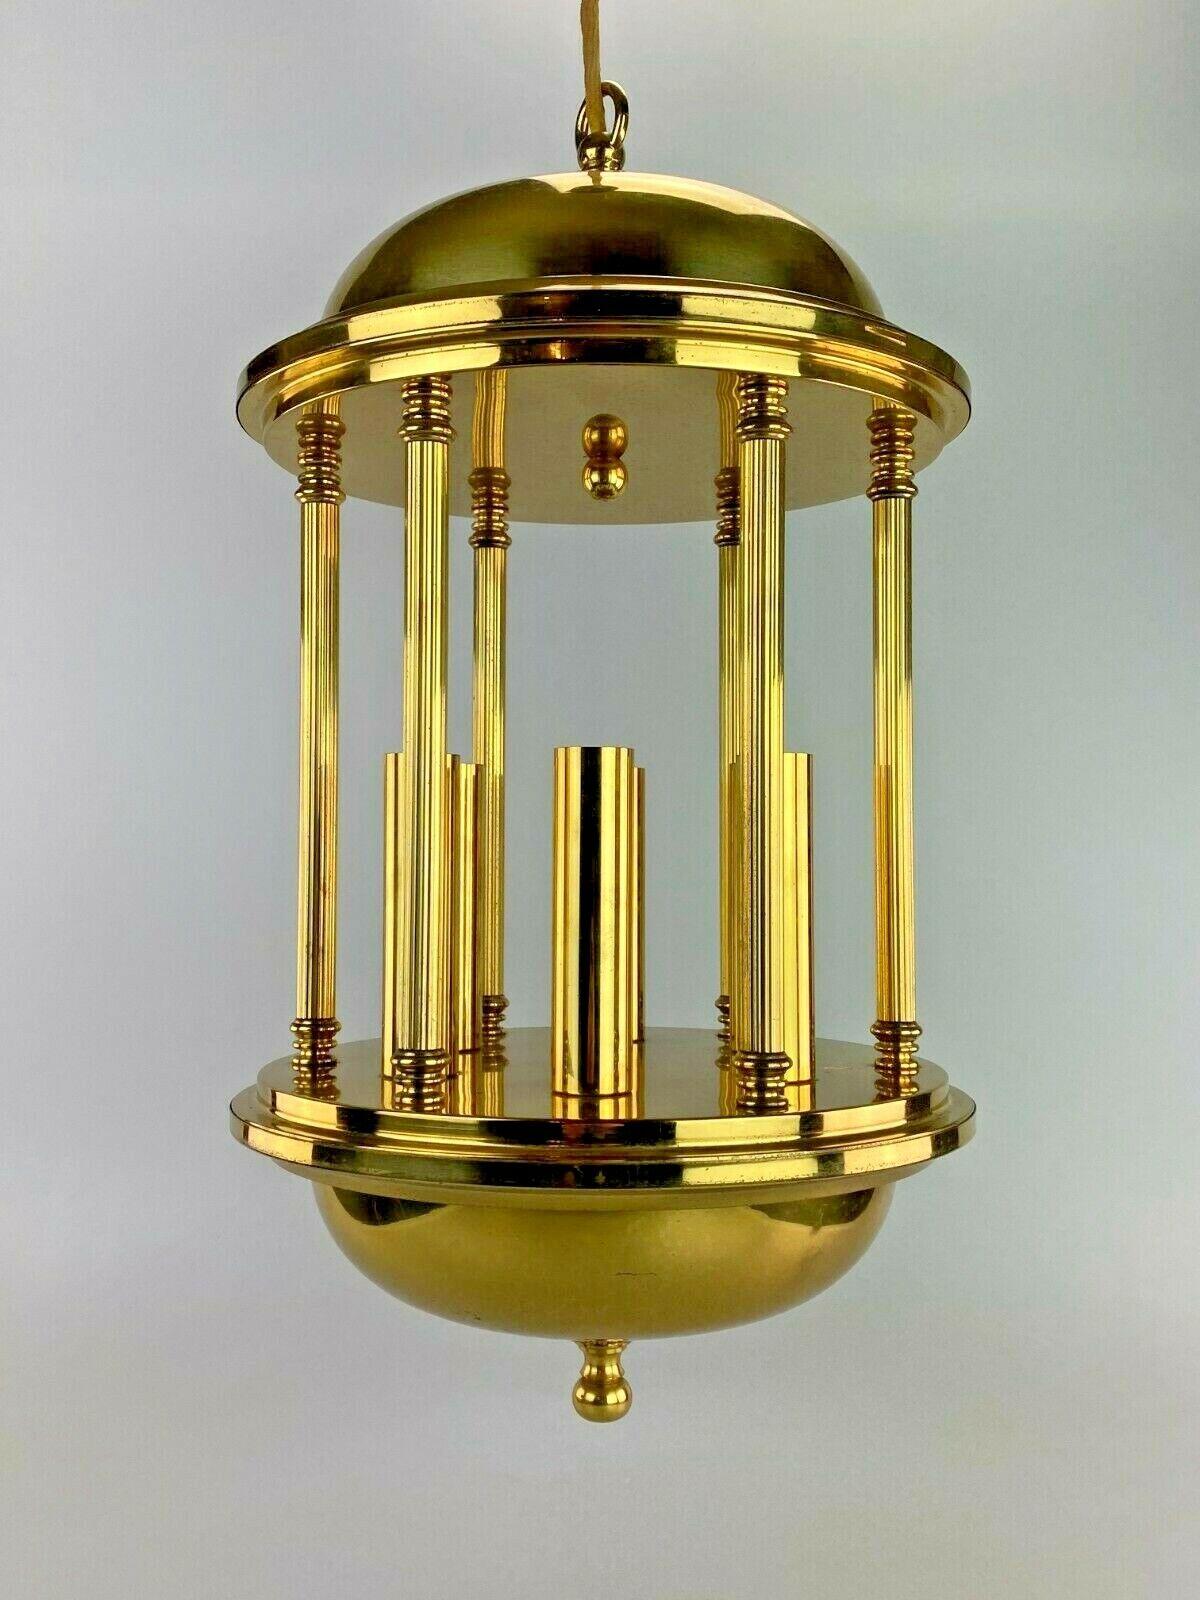 60s 70s XL lamp light ceiling lamp hanging lamp design brass 60s 70s

Object: ceiling lamp

Manufacturer:

Condition: good - vintage

Age: around 1960-1970

Dimensions:

Diameter = 30cm
Height = 55cm

Other notes:

The pictures